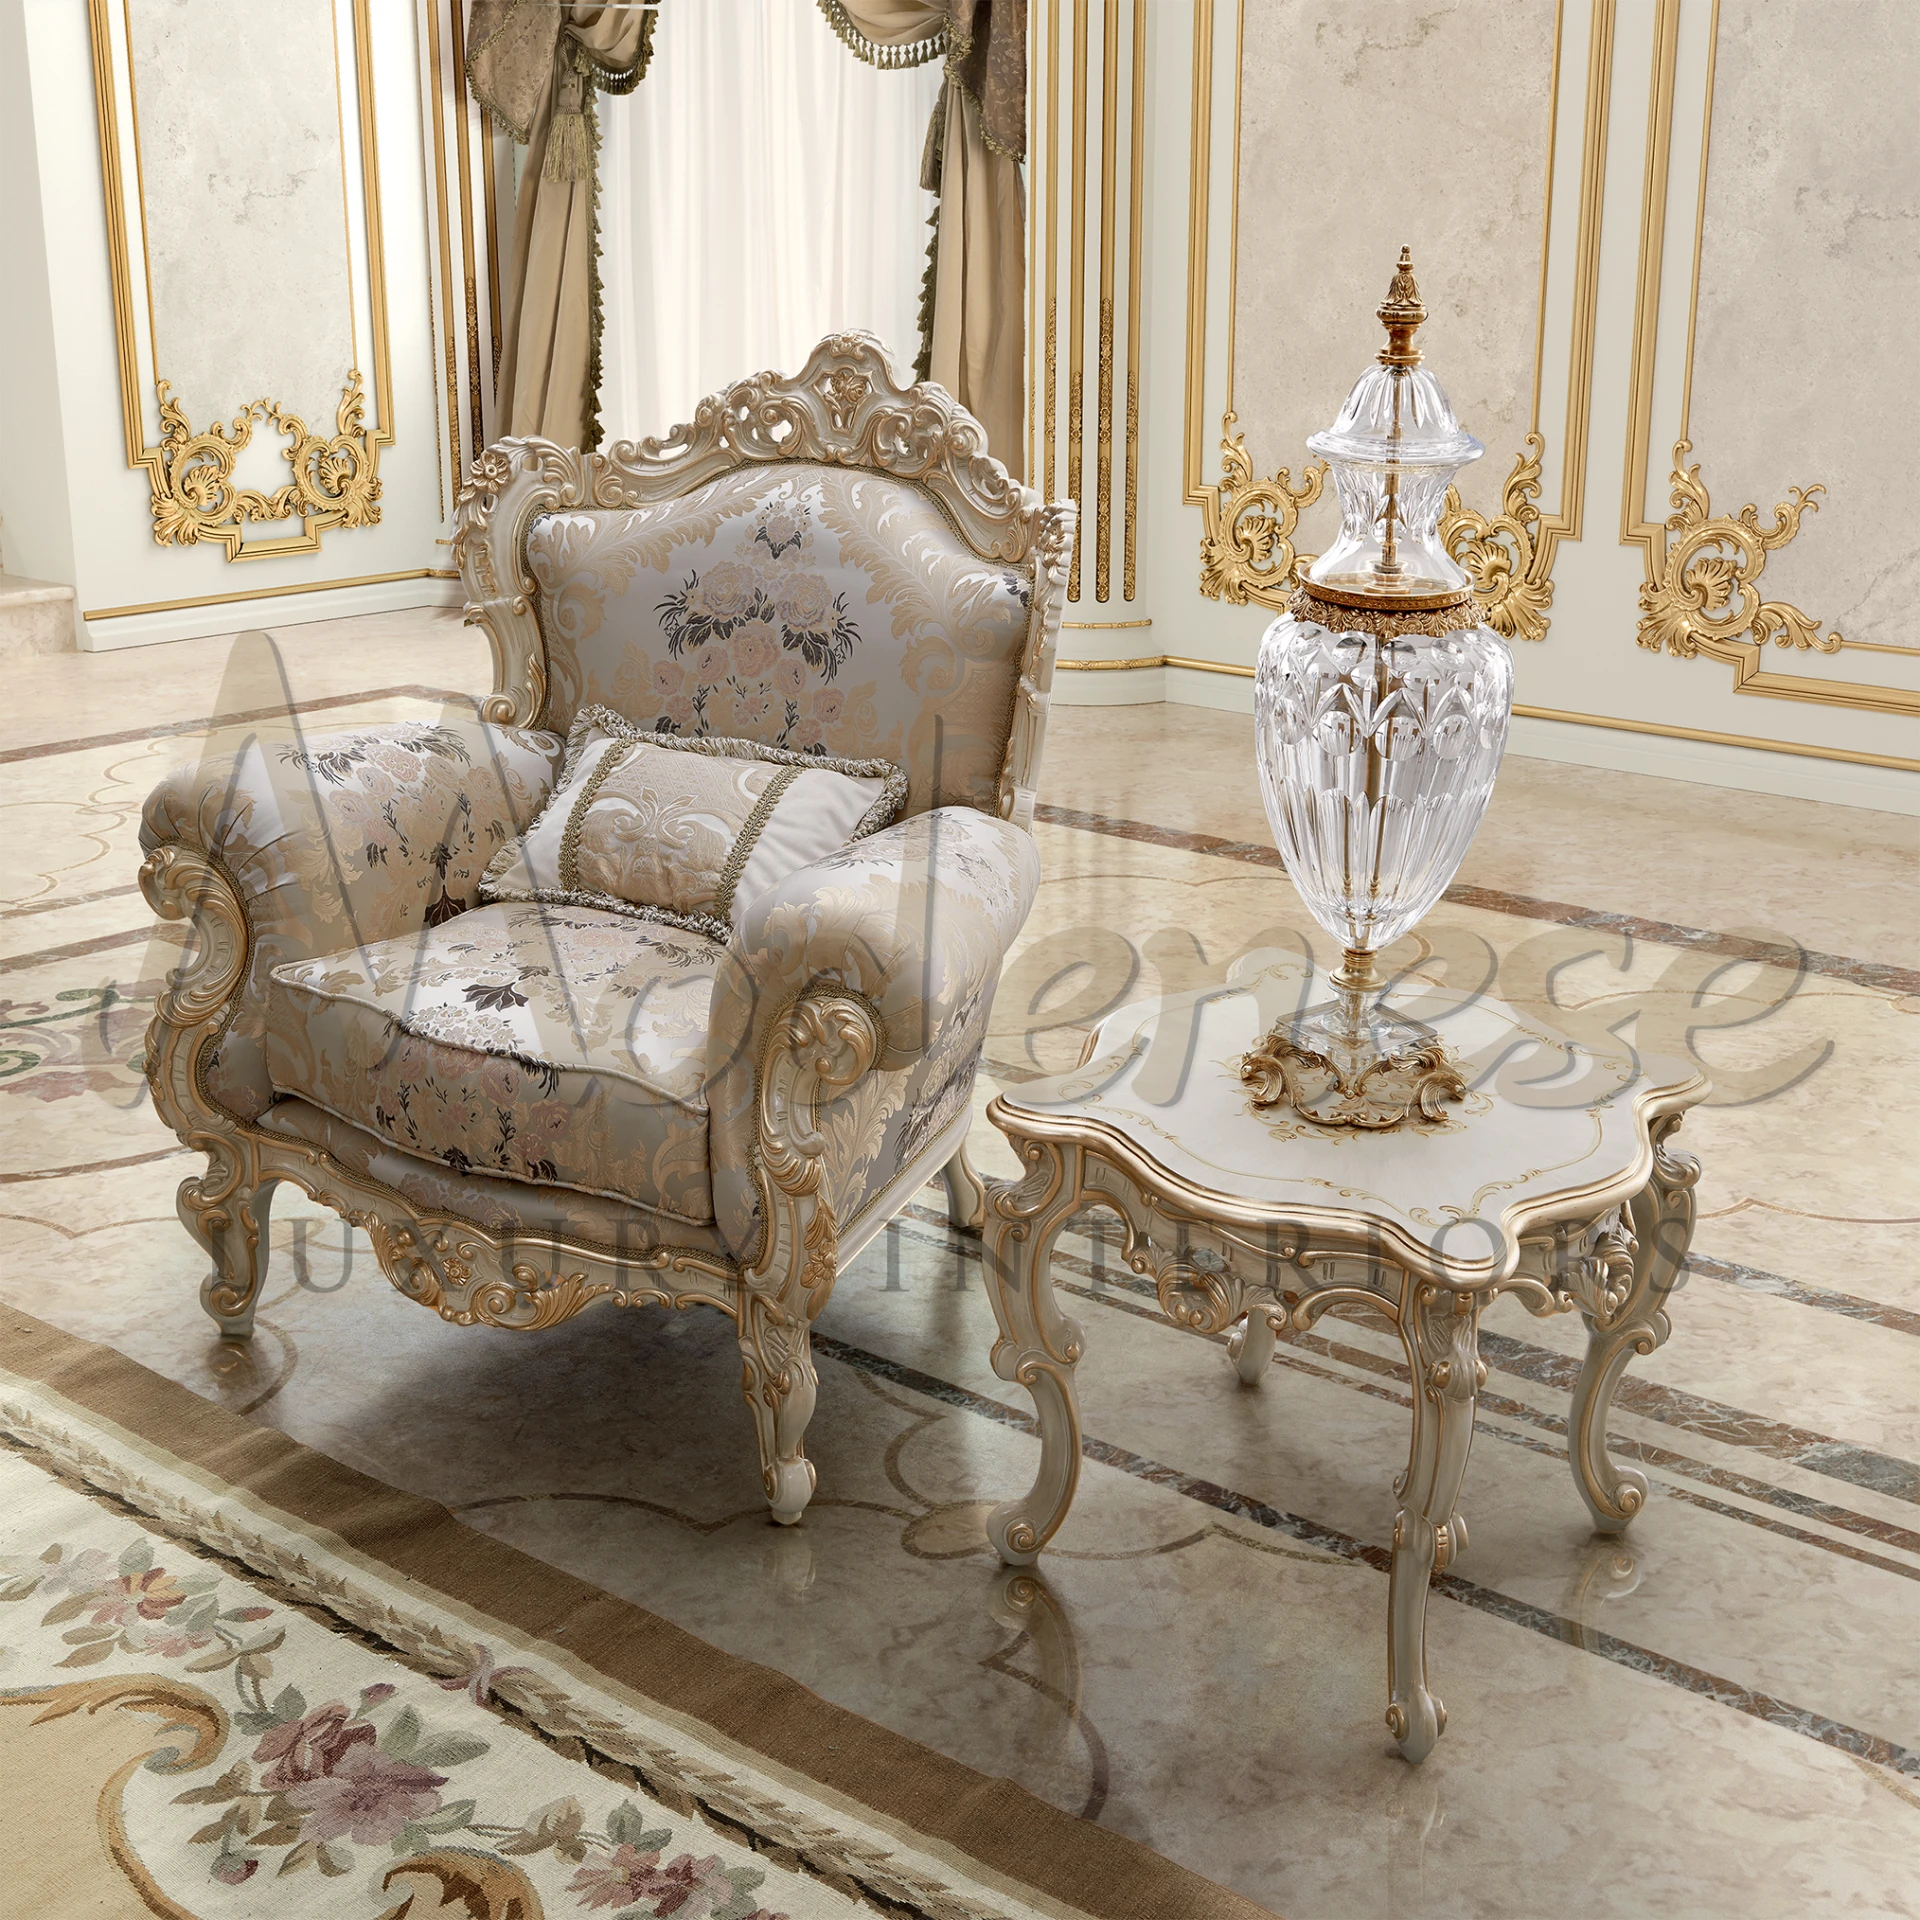 Luxury Marble Side Table, featuring Italian design and baroque style, ideal for classic interior design and sophisticated spaces.